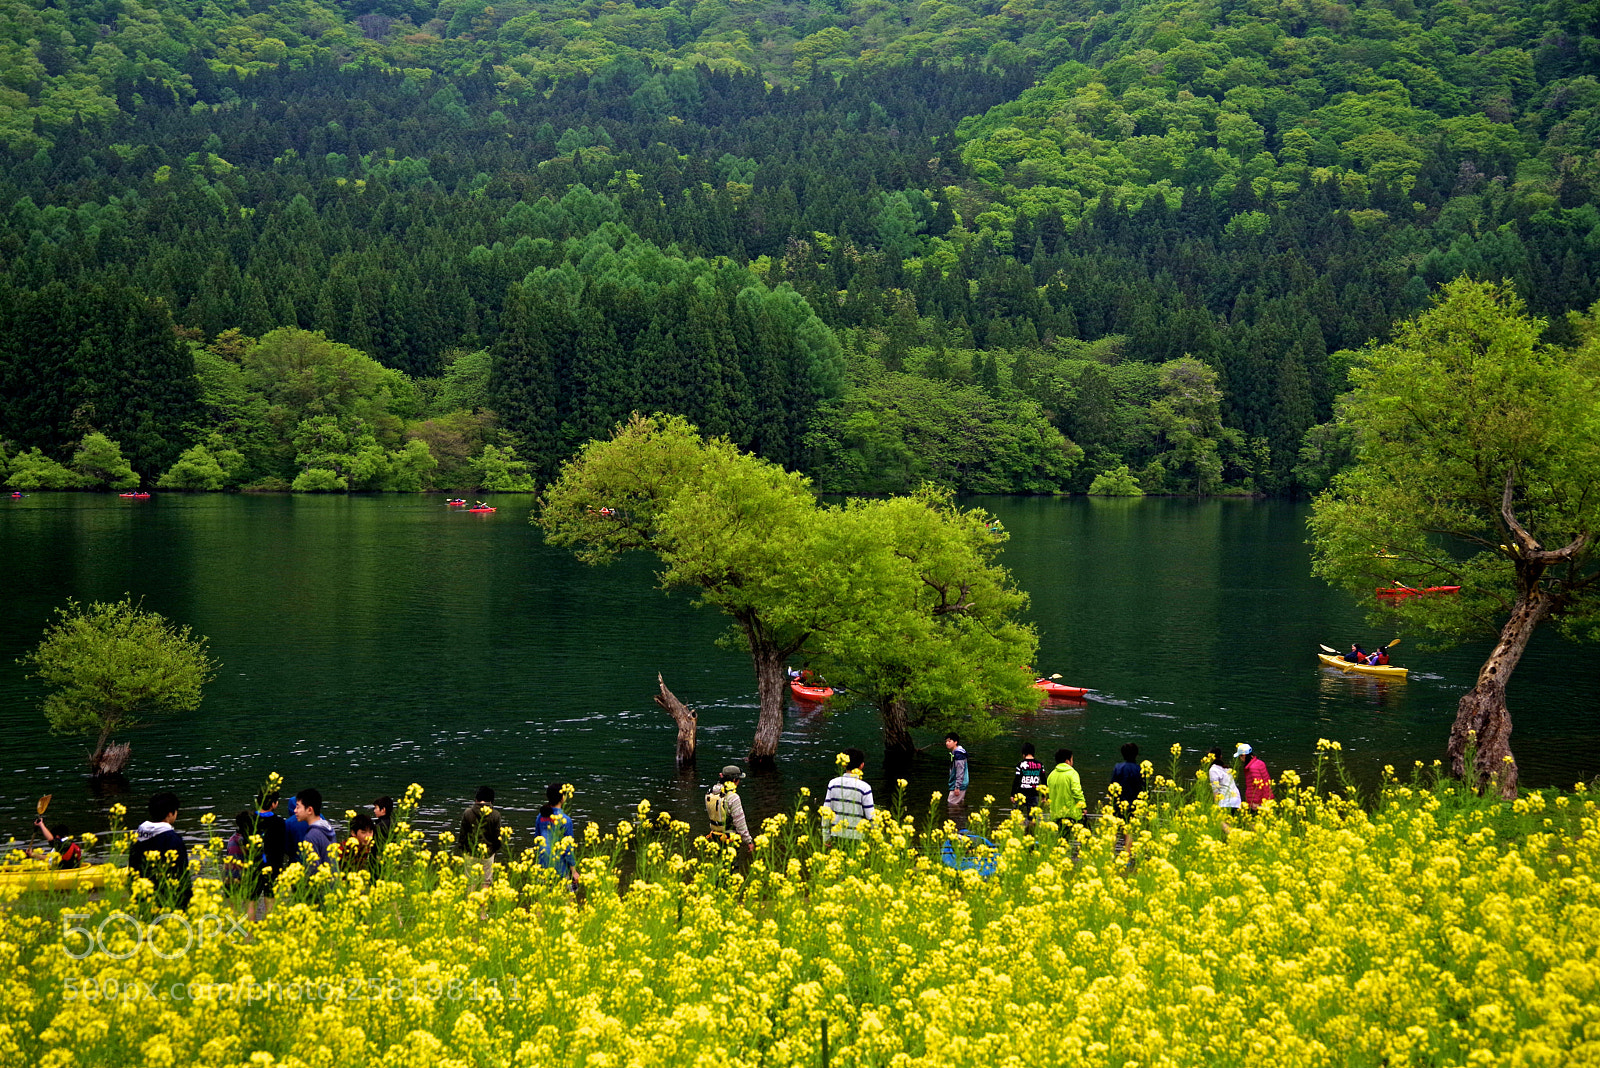 Pentax K-1 sample photo. The lake with yellow photography